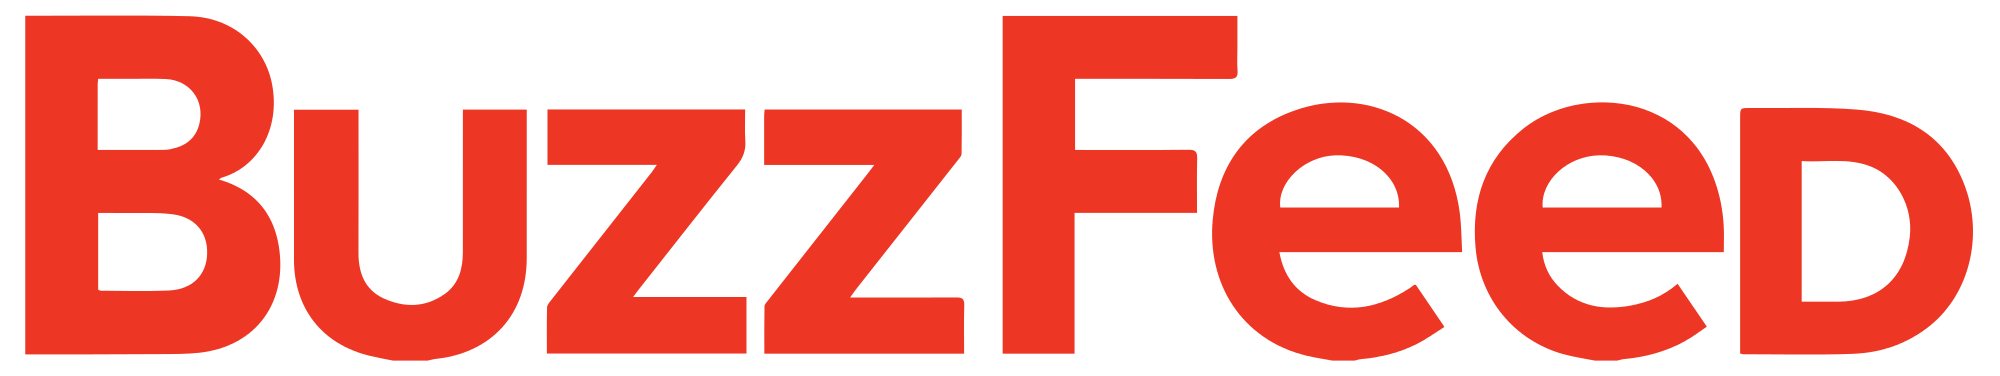 buzz_feed_logo.png